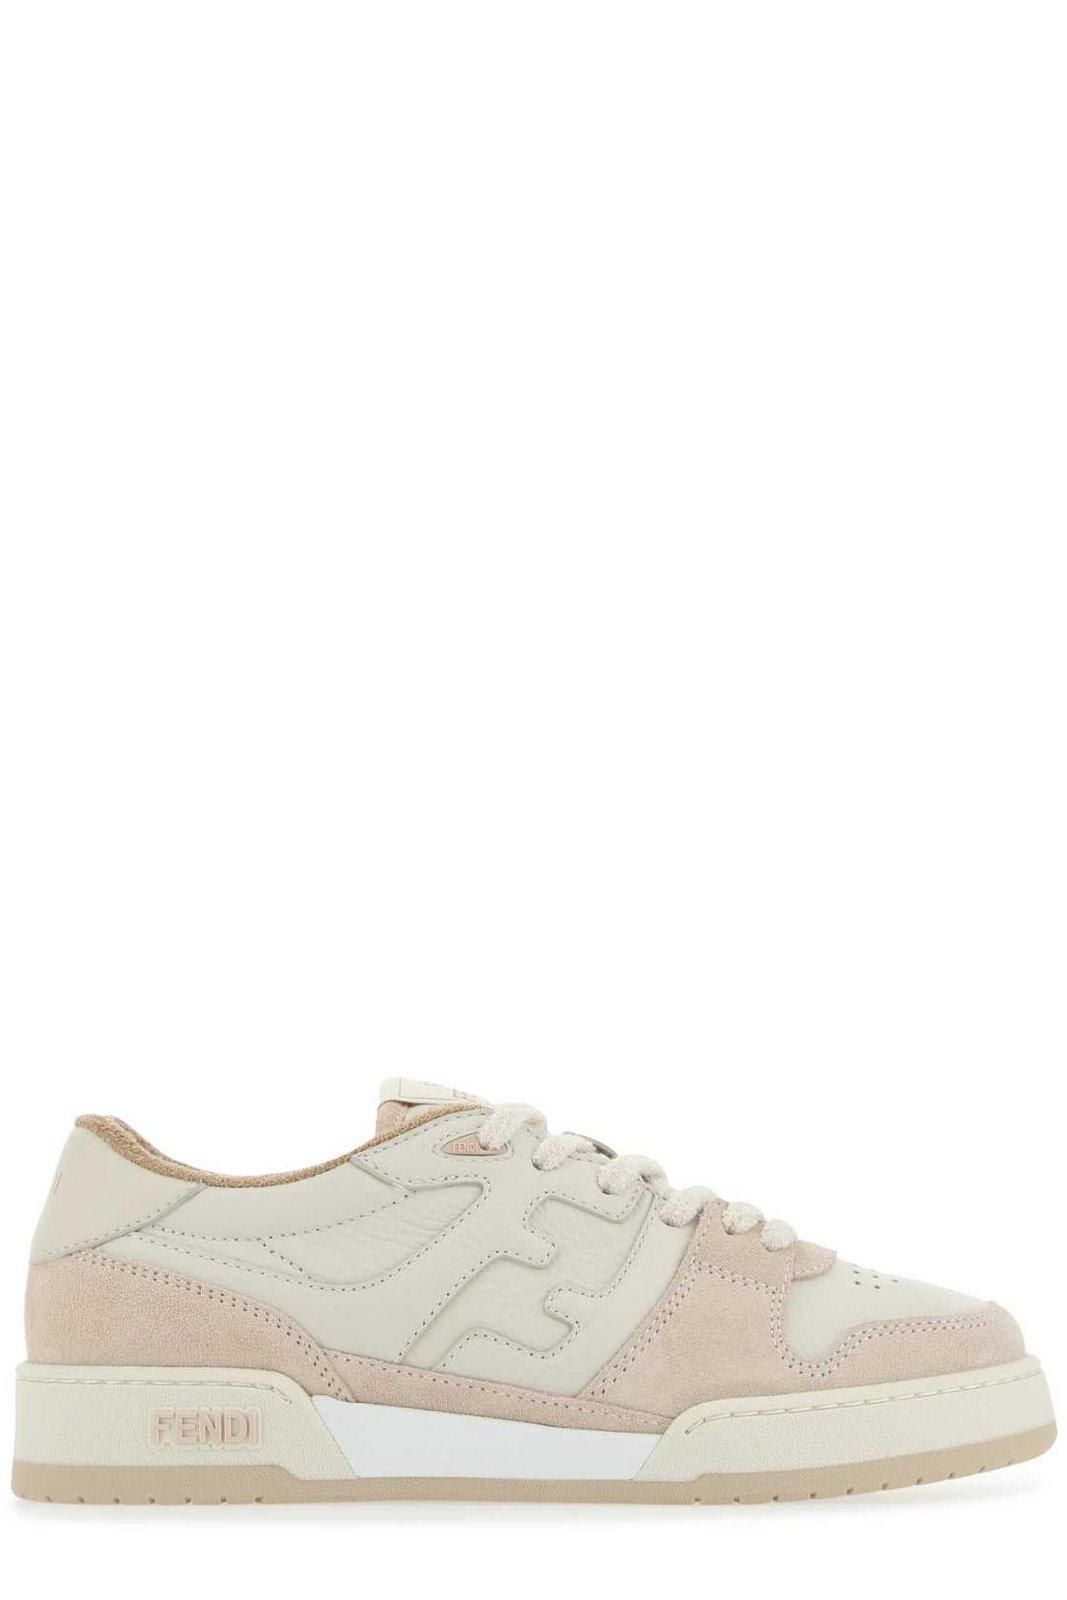 Fendi Round Toe Lace-up Sneakers